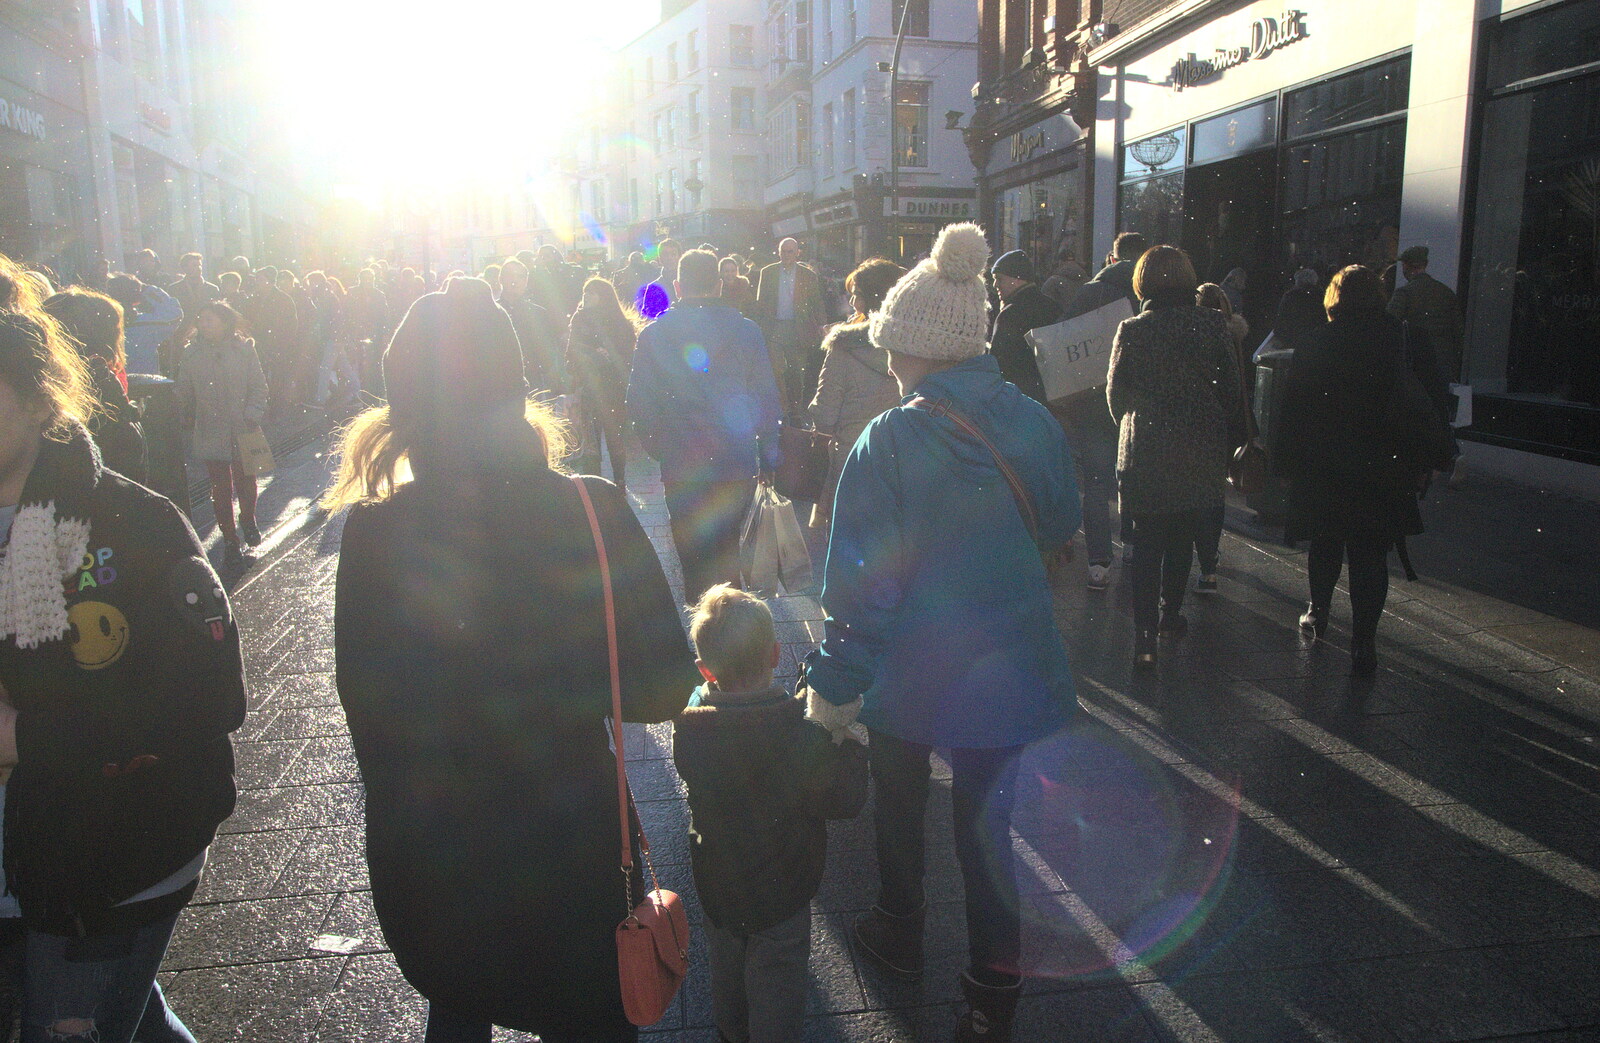 Harry and Isobel head in to the light from Christmas Eve in Dublin and Blackrock, Ireland - 24th December 2015